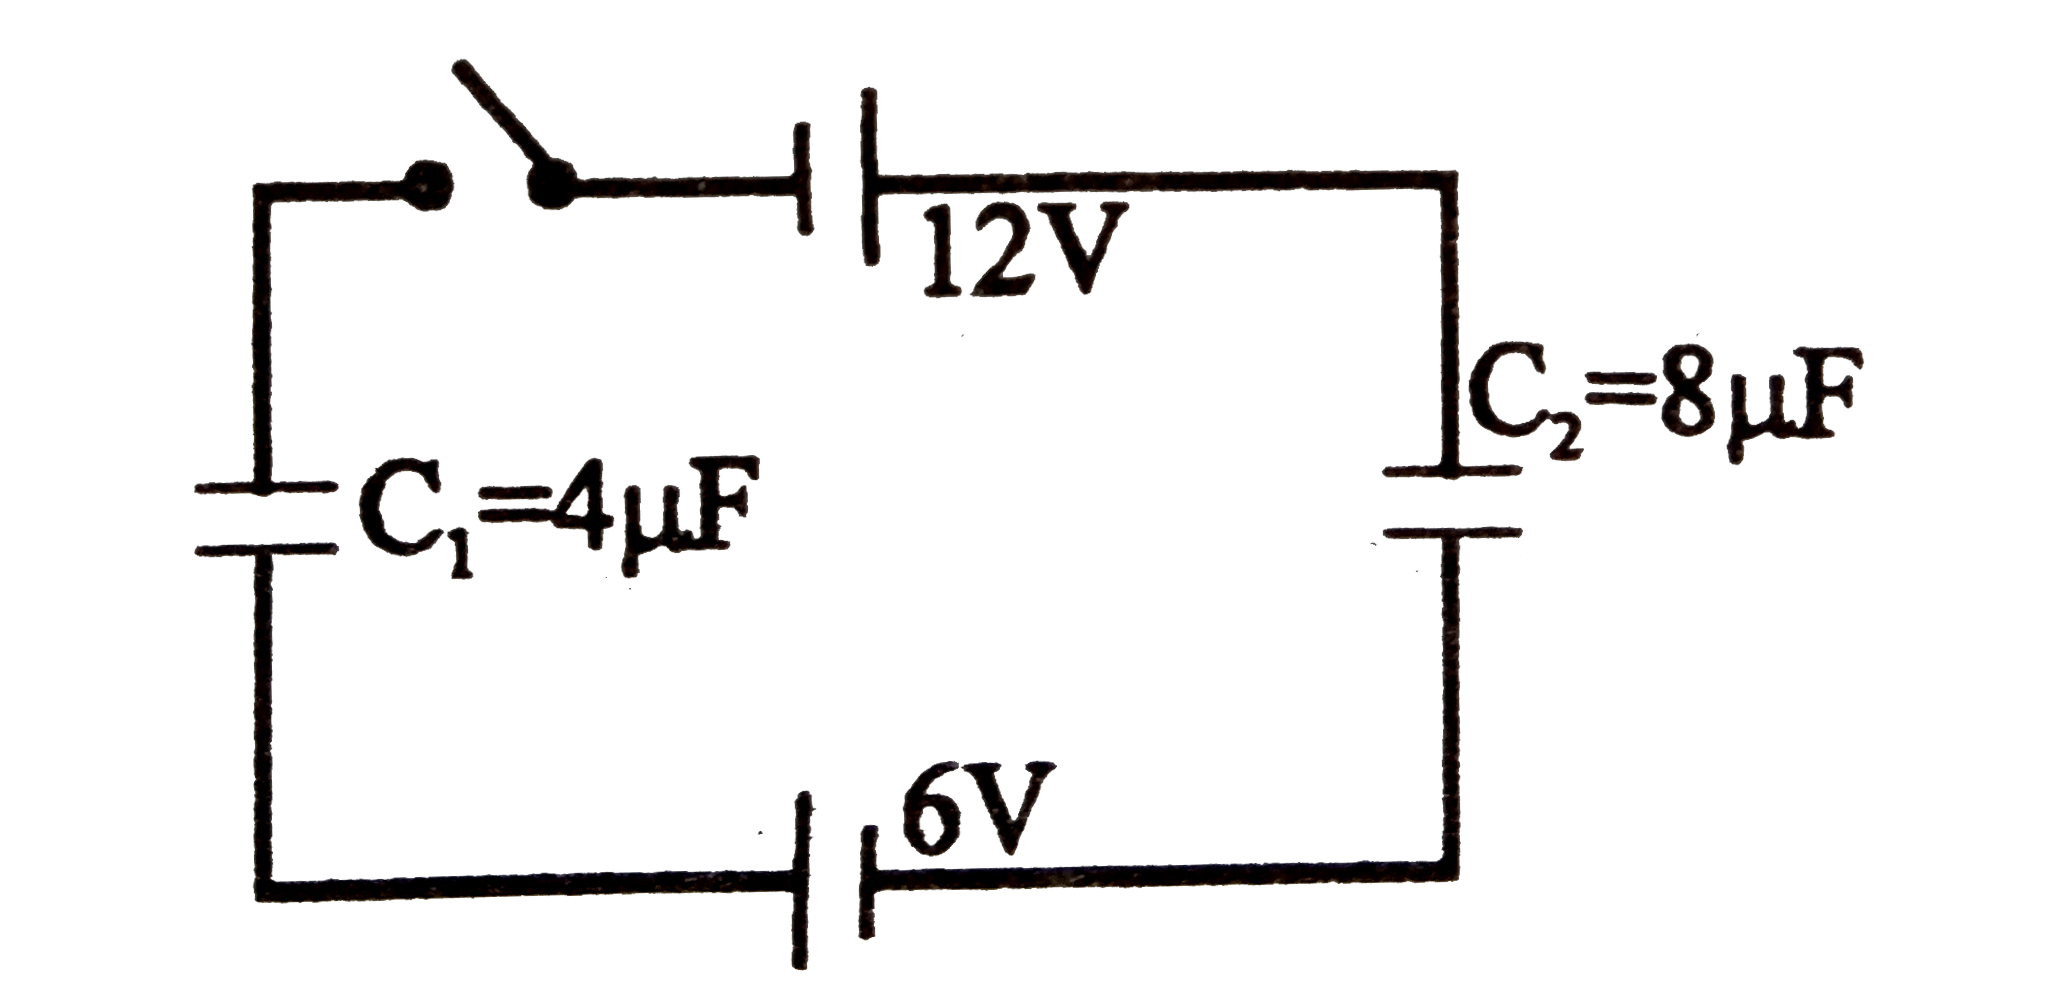 In the circuit shown initially C(1),C(2) are uncharged. After closing the switch